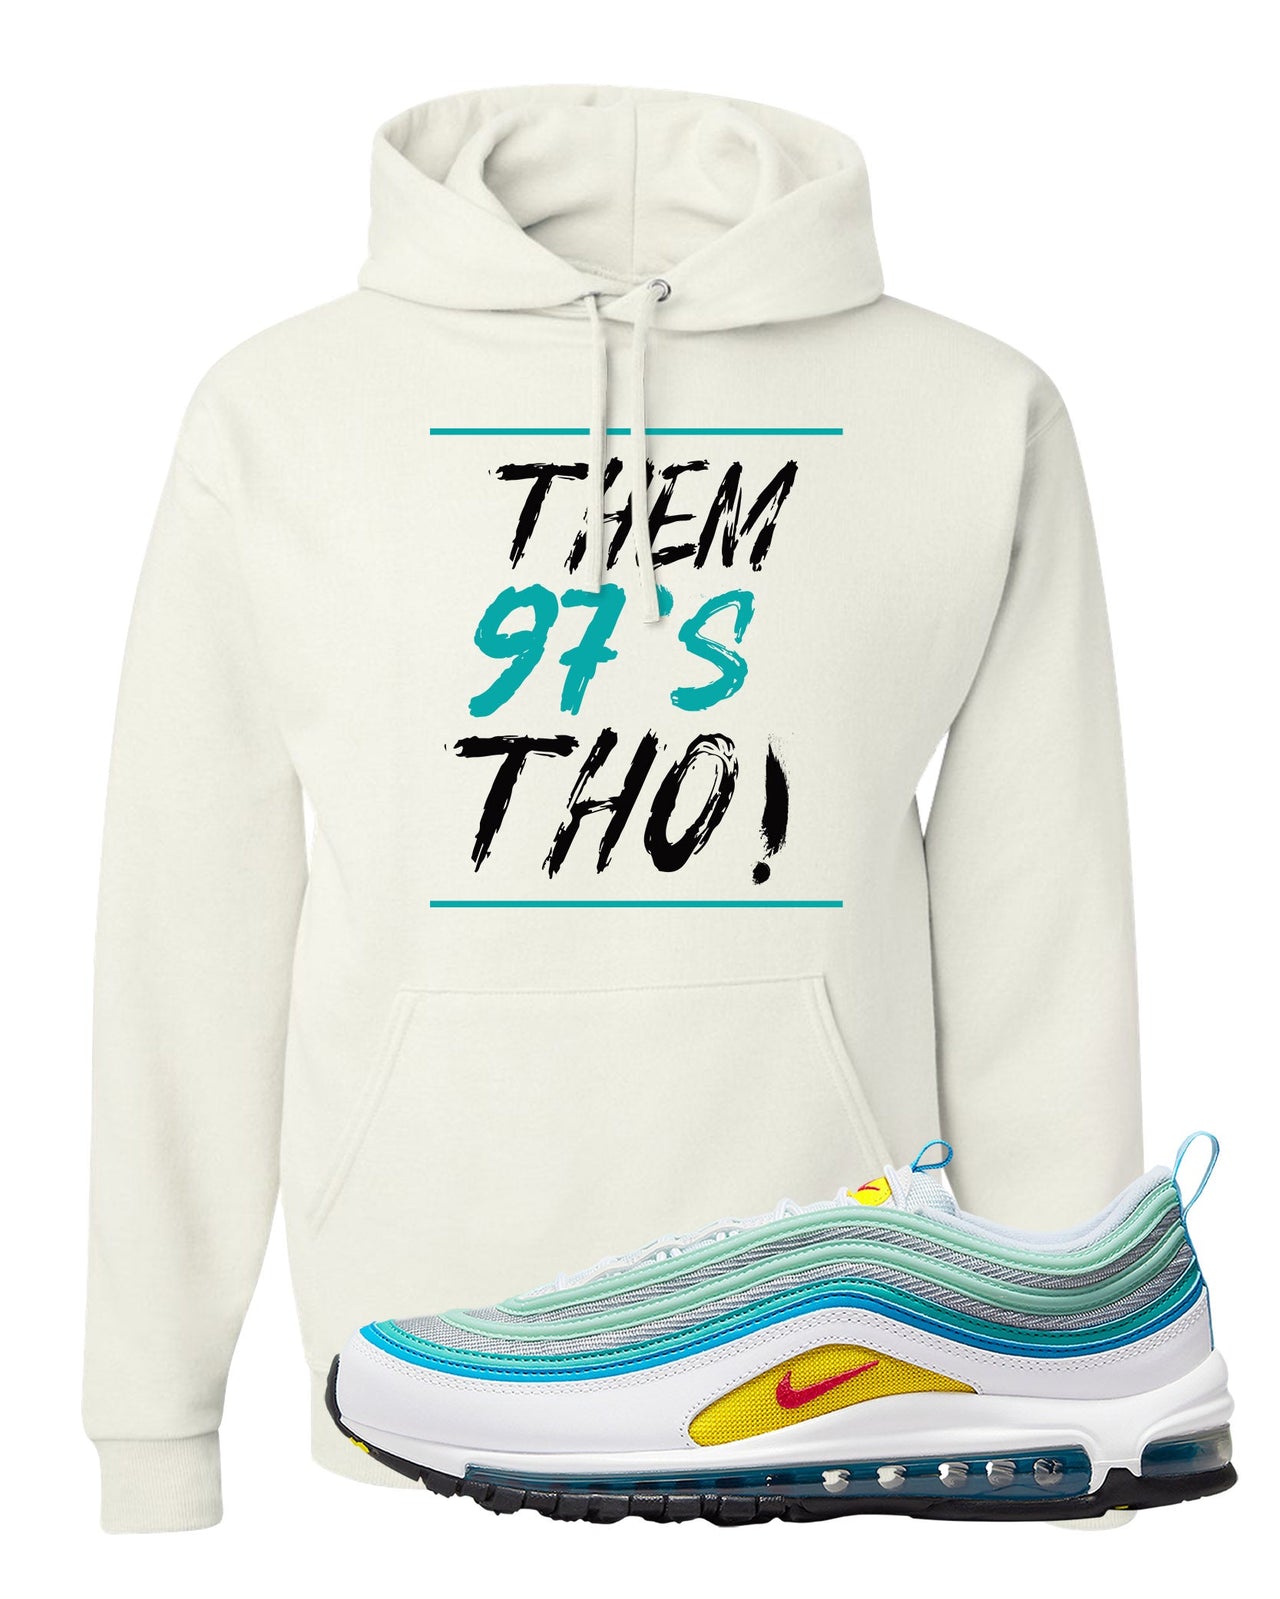 Spring Floral 97s Hoodie | Them 97's Tho, White